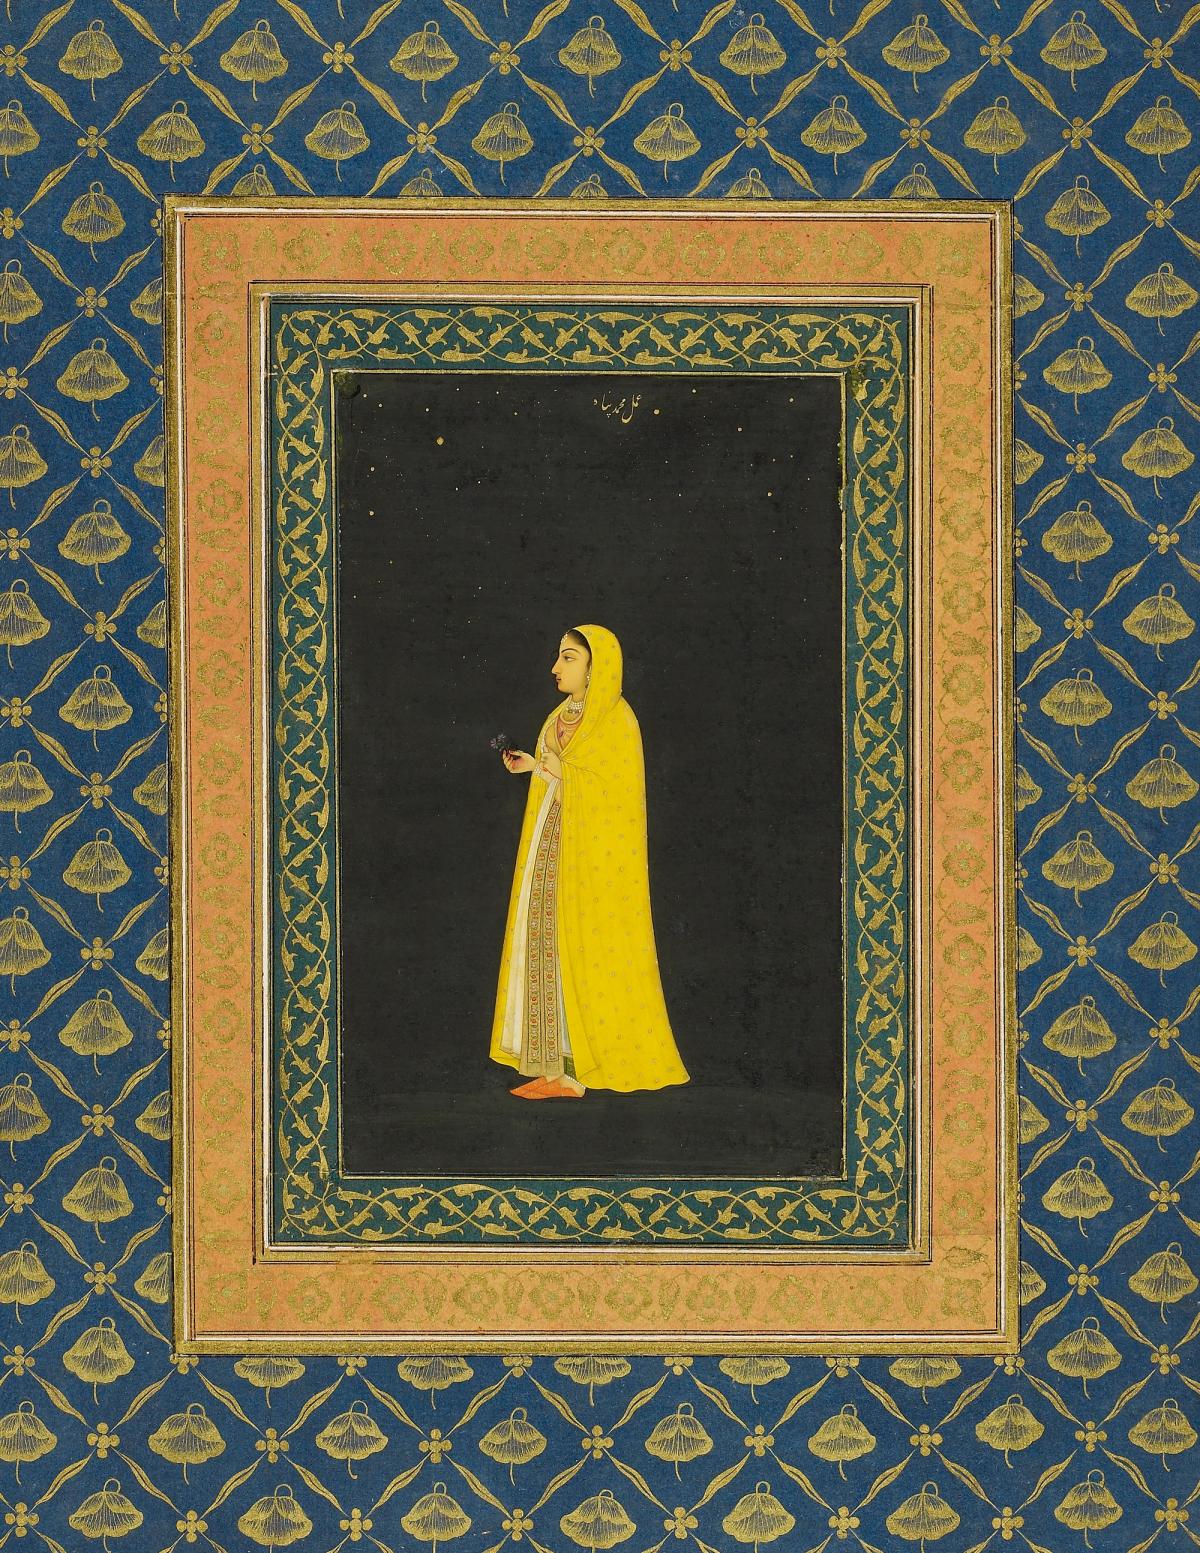 Unknown Artist, A Late Mughal Album of Calligraphy and Paintings c. 1720-1740

Royal Collection Trust / © His Majesty King Charles III 2023